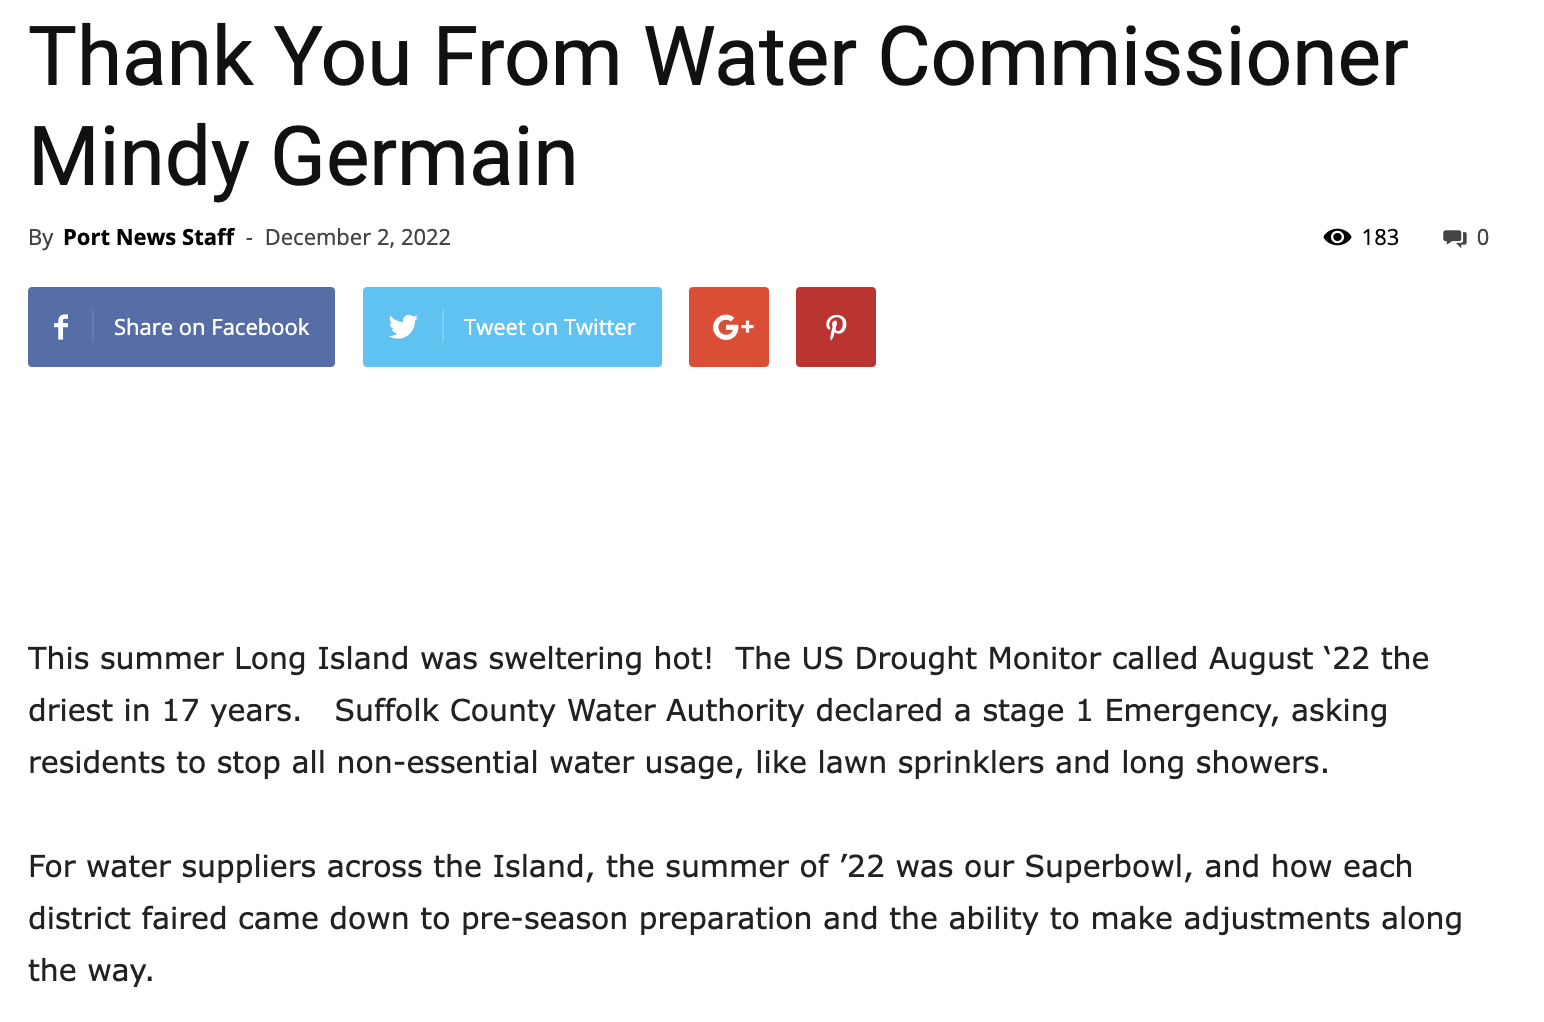 Thank You From Water Commissioner Mindy Germain